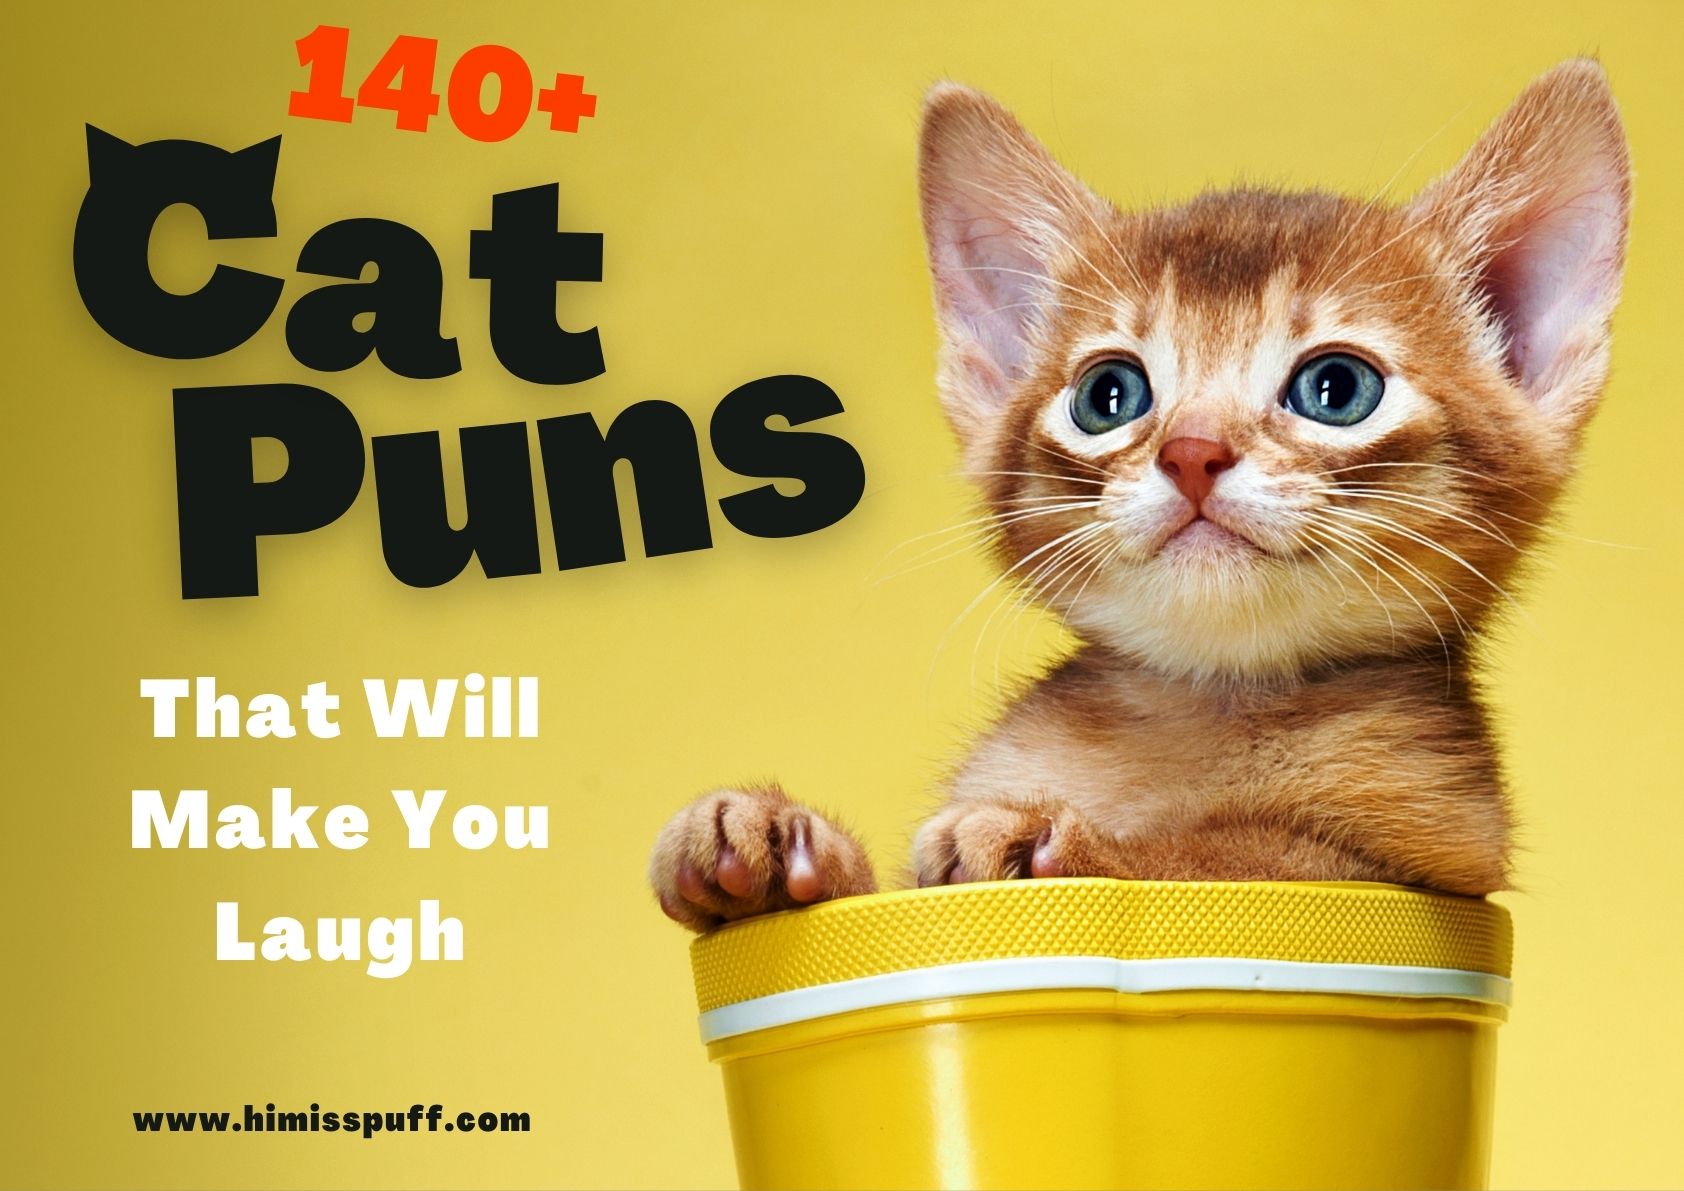 ️ 140+ Cat Puns That Will Make You Laugh